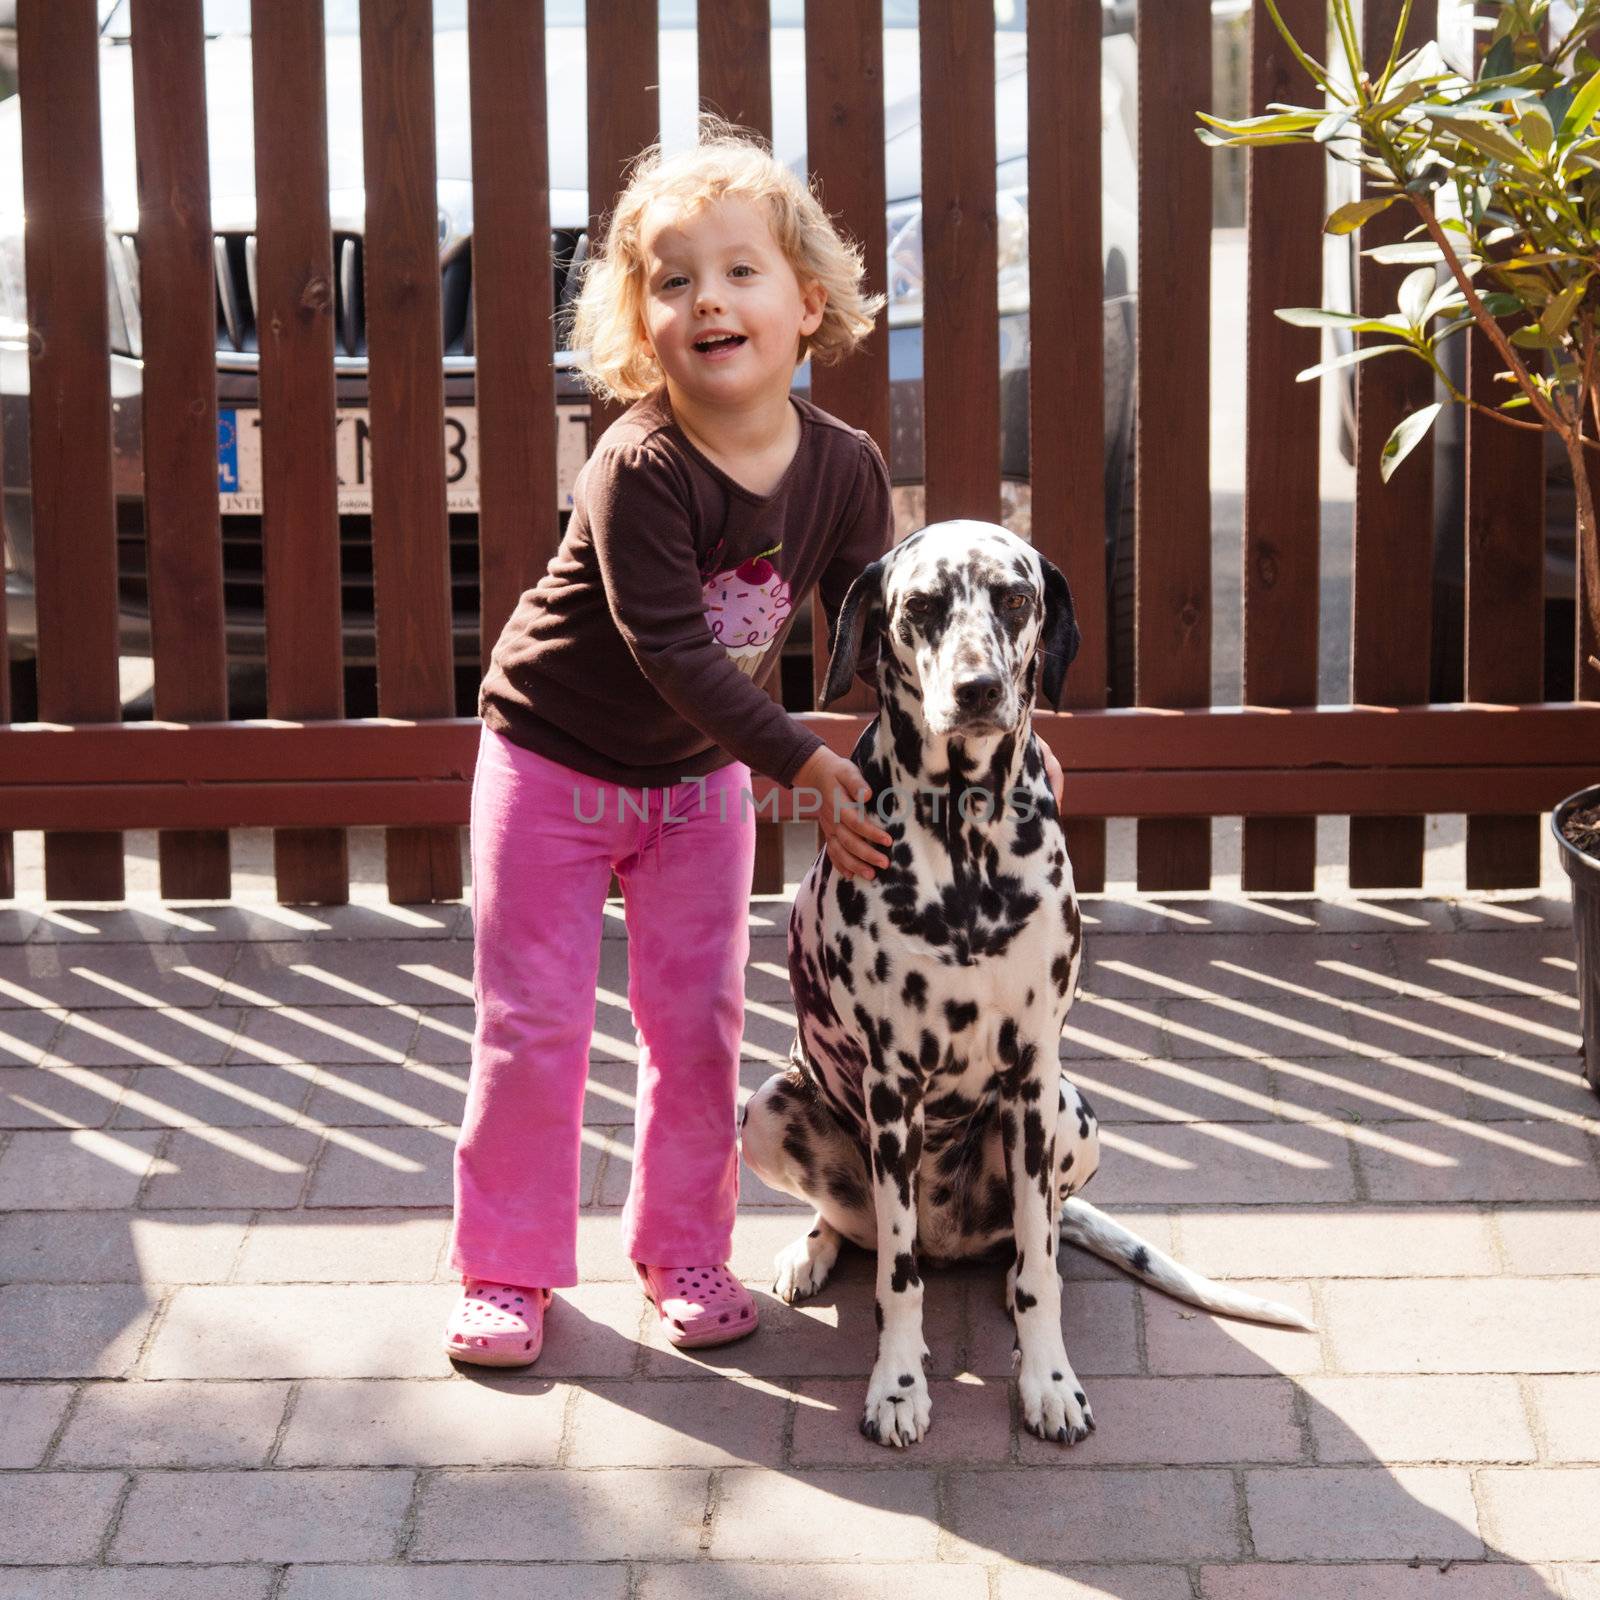 Little girl playing with dalmatian in a garden.